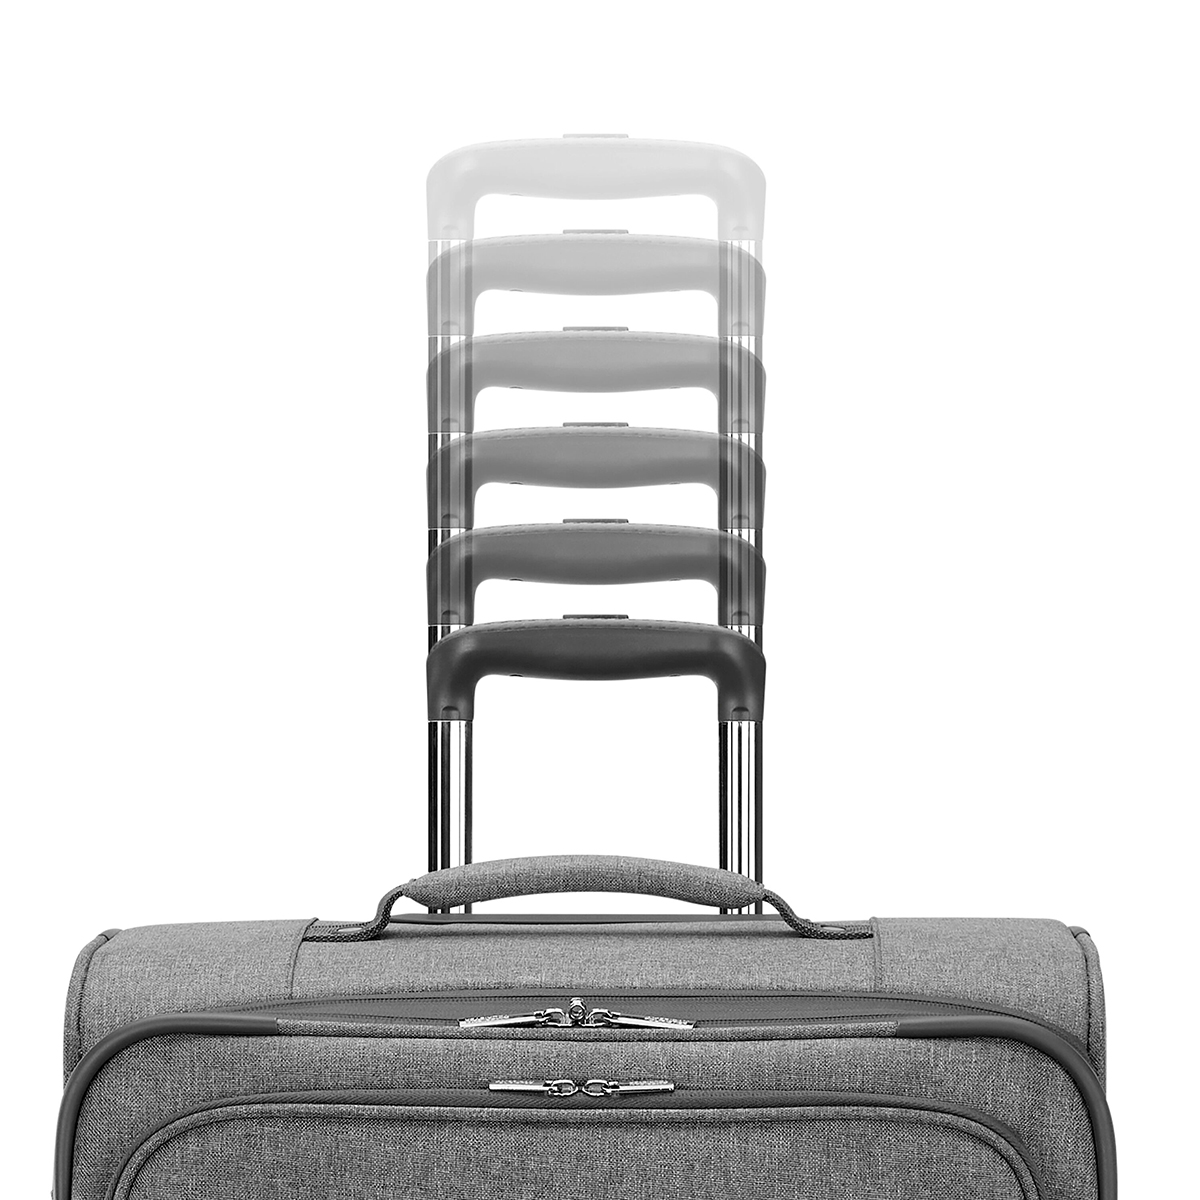 American Tourister(R) Whim 29in. Spinner Luggage